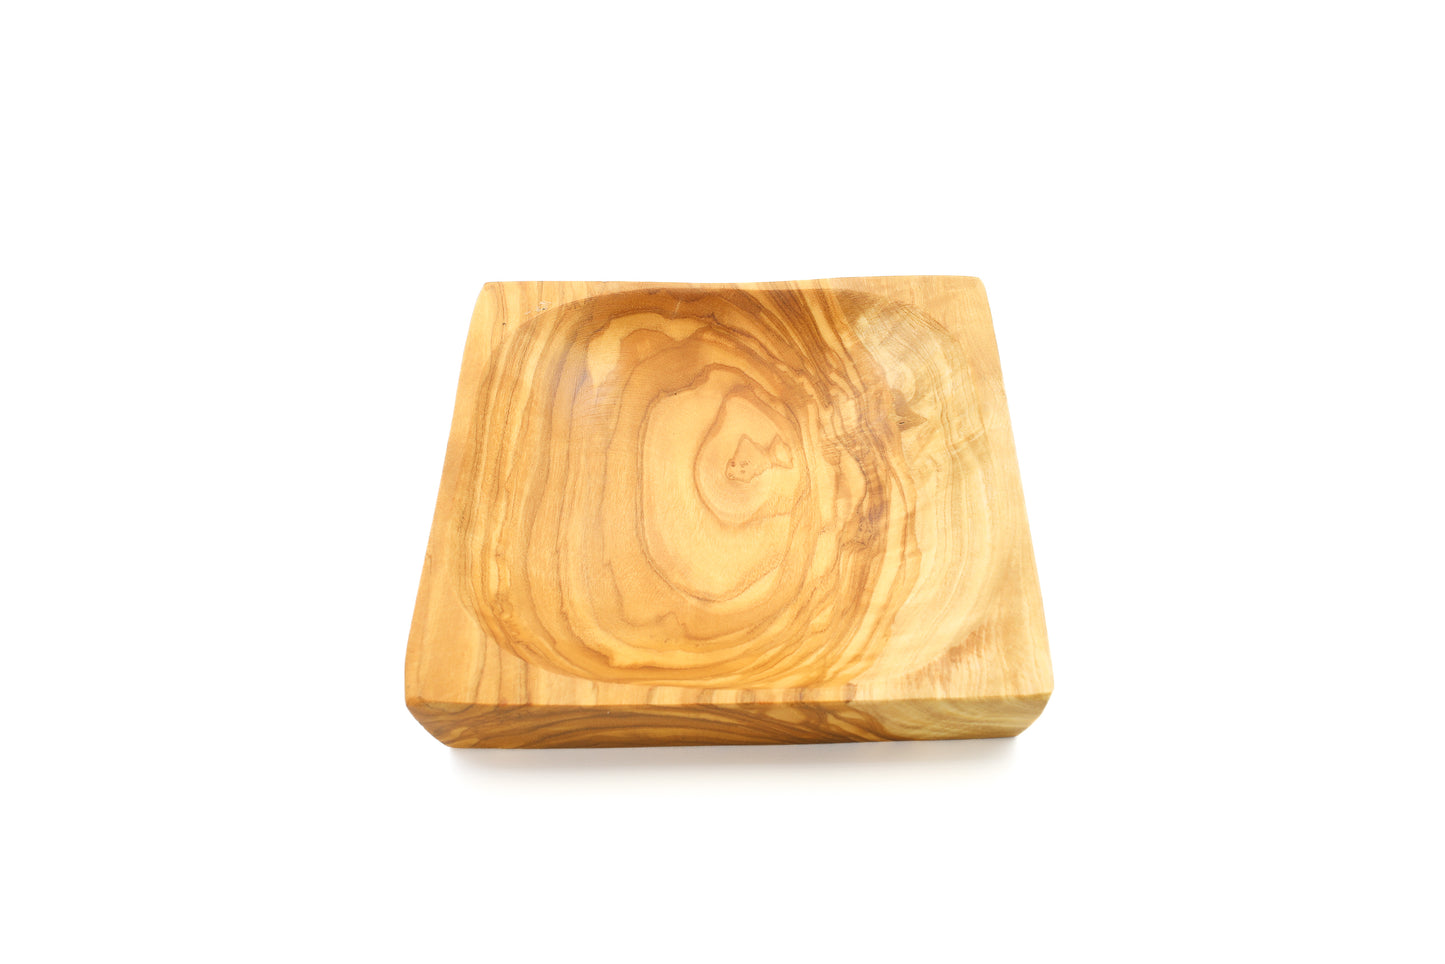 Square and rectangular olive wood serving platters